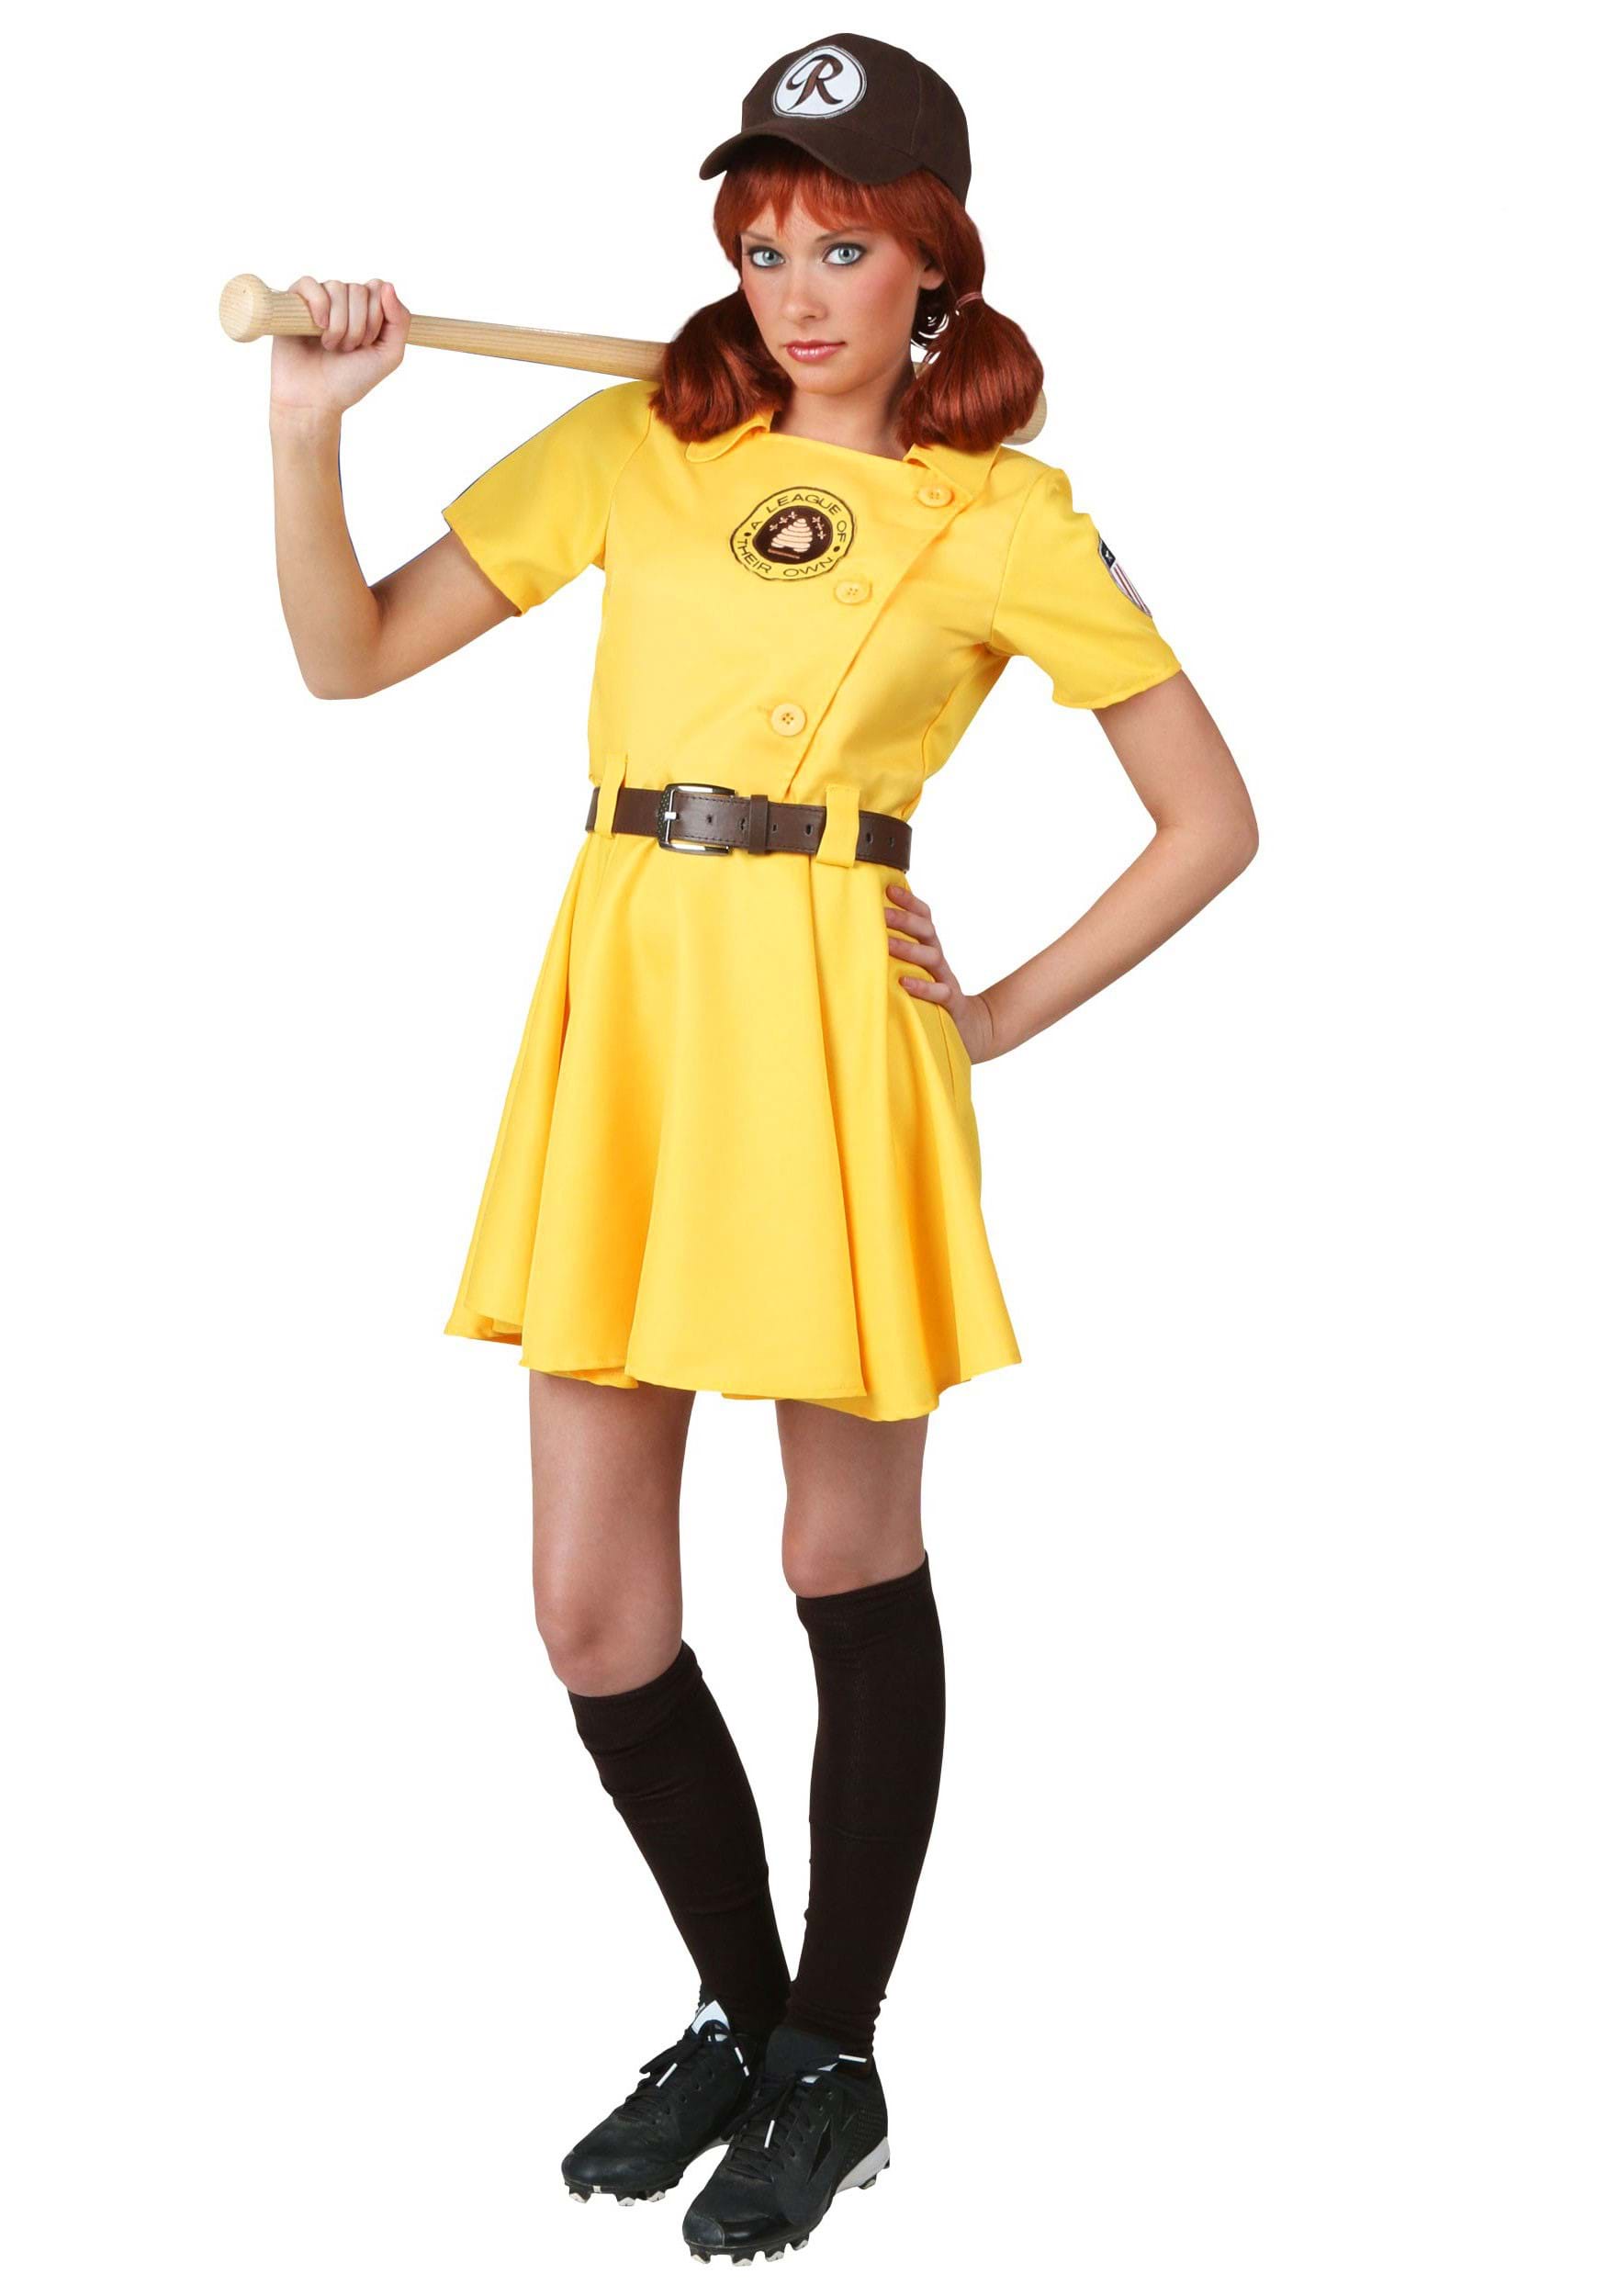 Image of Women's A League of Their Own Kit Baseball Uniform Costume | Exclusive Costumes ID LEA8302AD-S